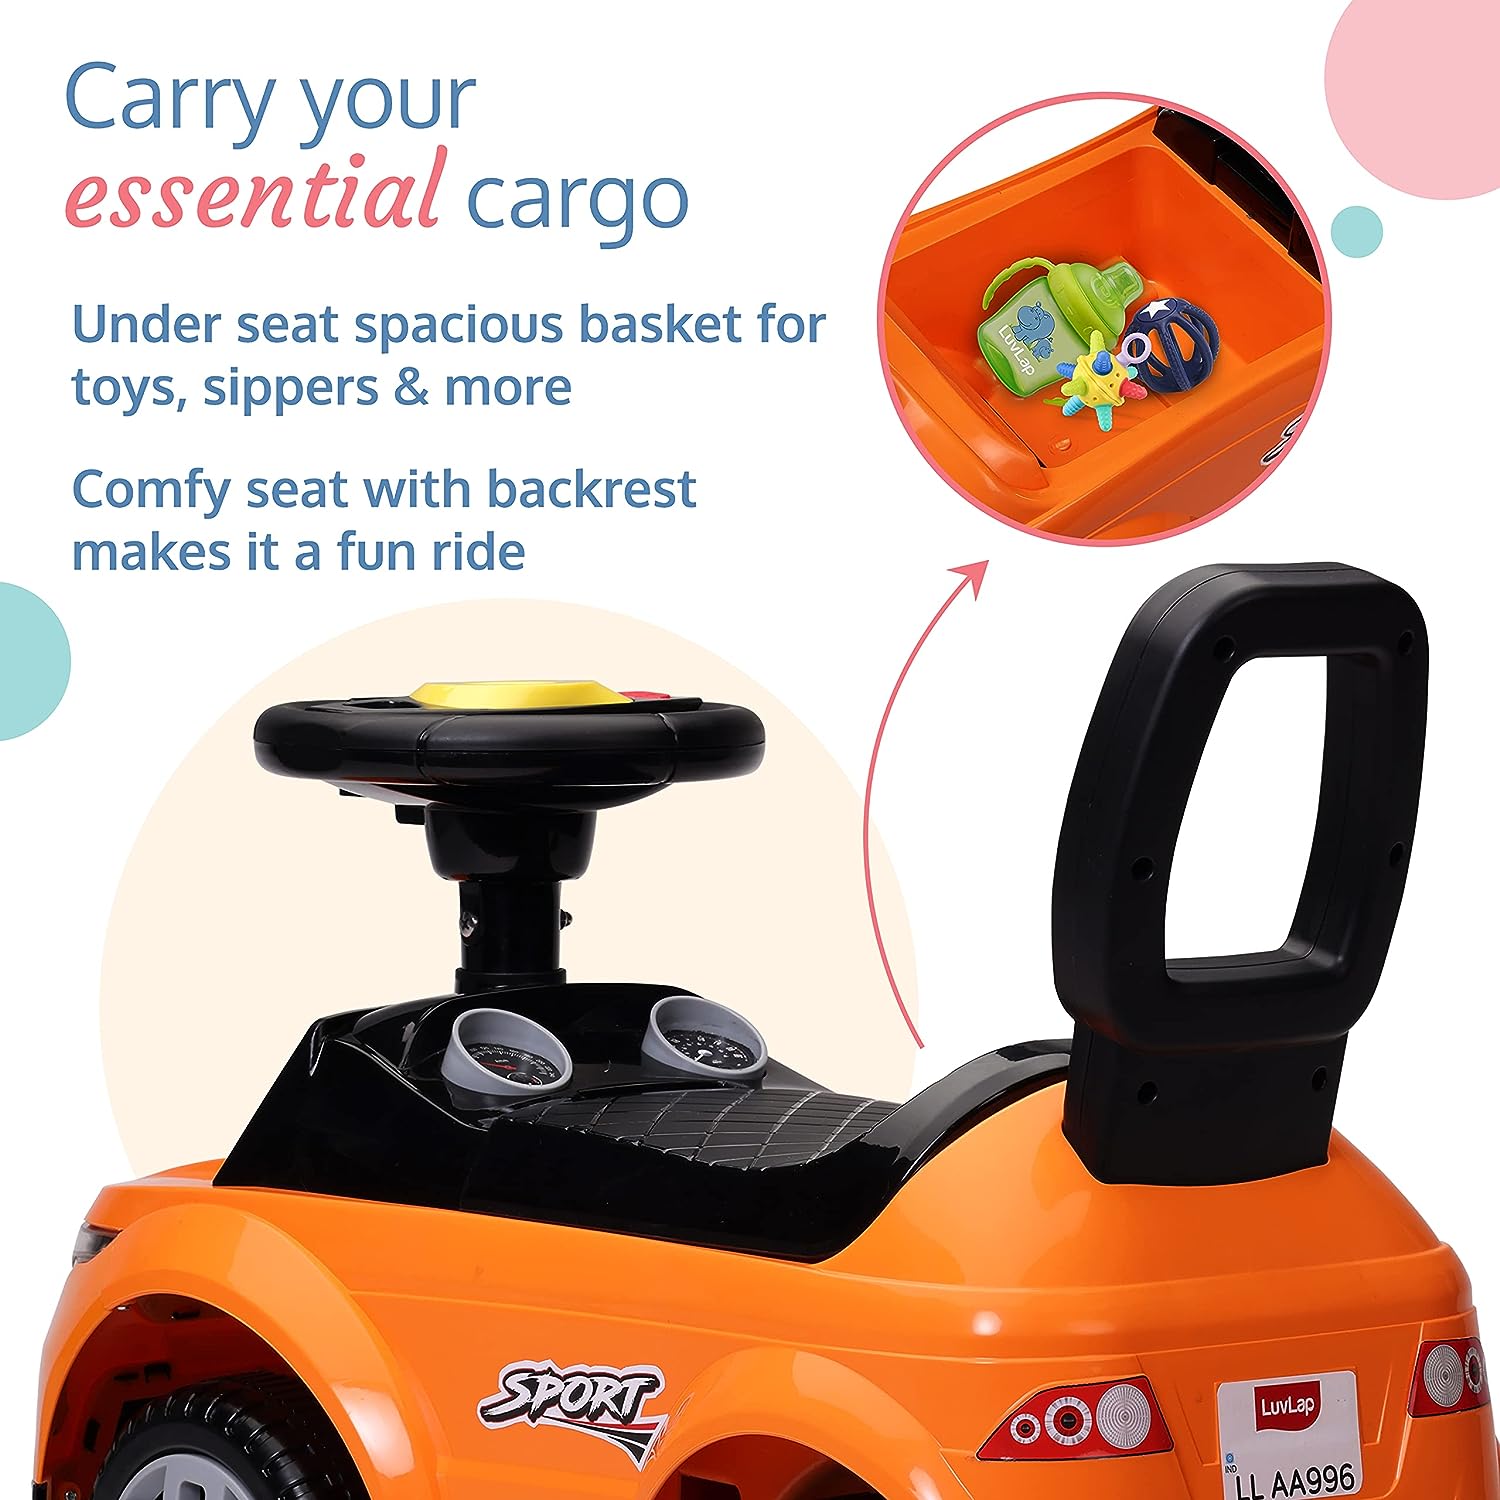 Starlight Ride-On Car for Kids with Music & Horn Steering, Push Car for Baby with Backrest, Safety Guard, Under Seat Storage & Big Wheels | Ride-On for Kids 1 to 3 Years Up to 25 Kgs (Orange)